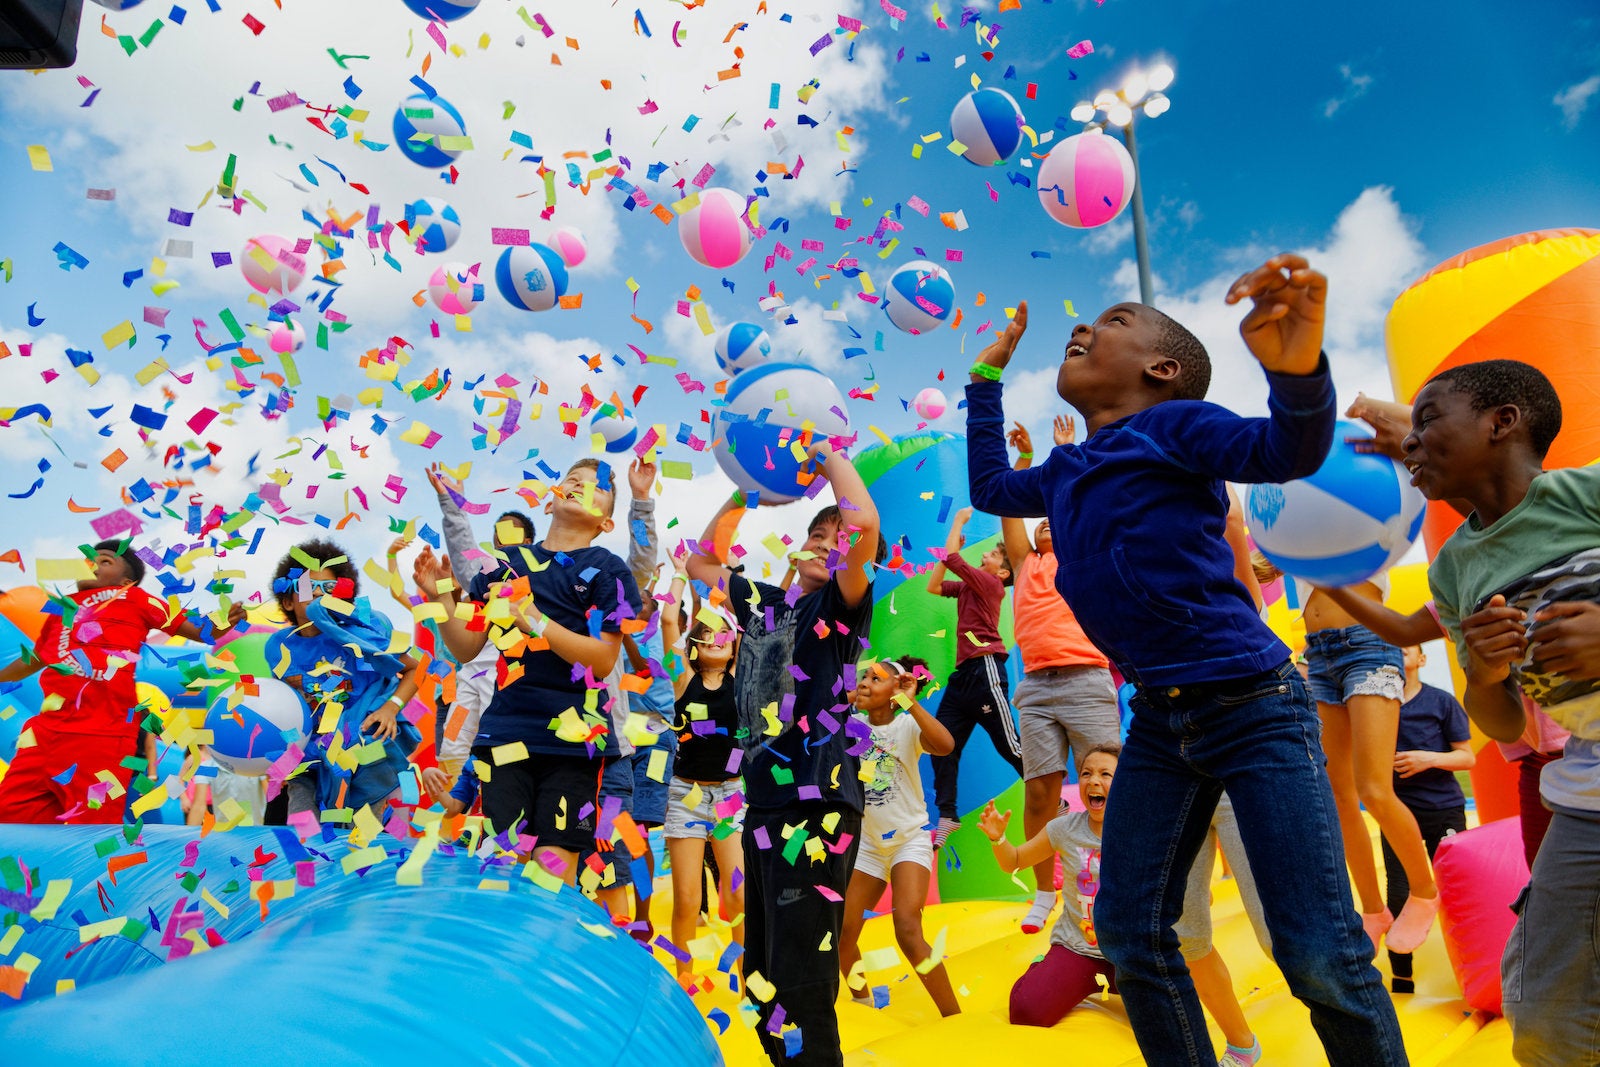 The world’s largest bounce house and planning ahead for theme park holidays: This month in family travel news